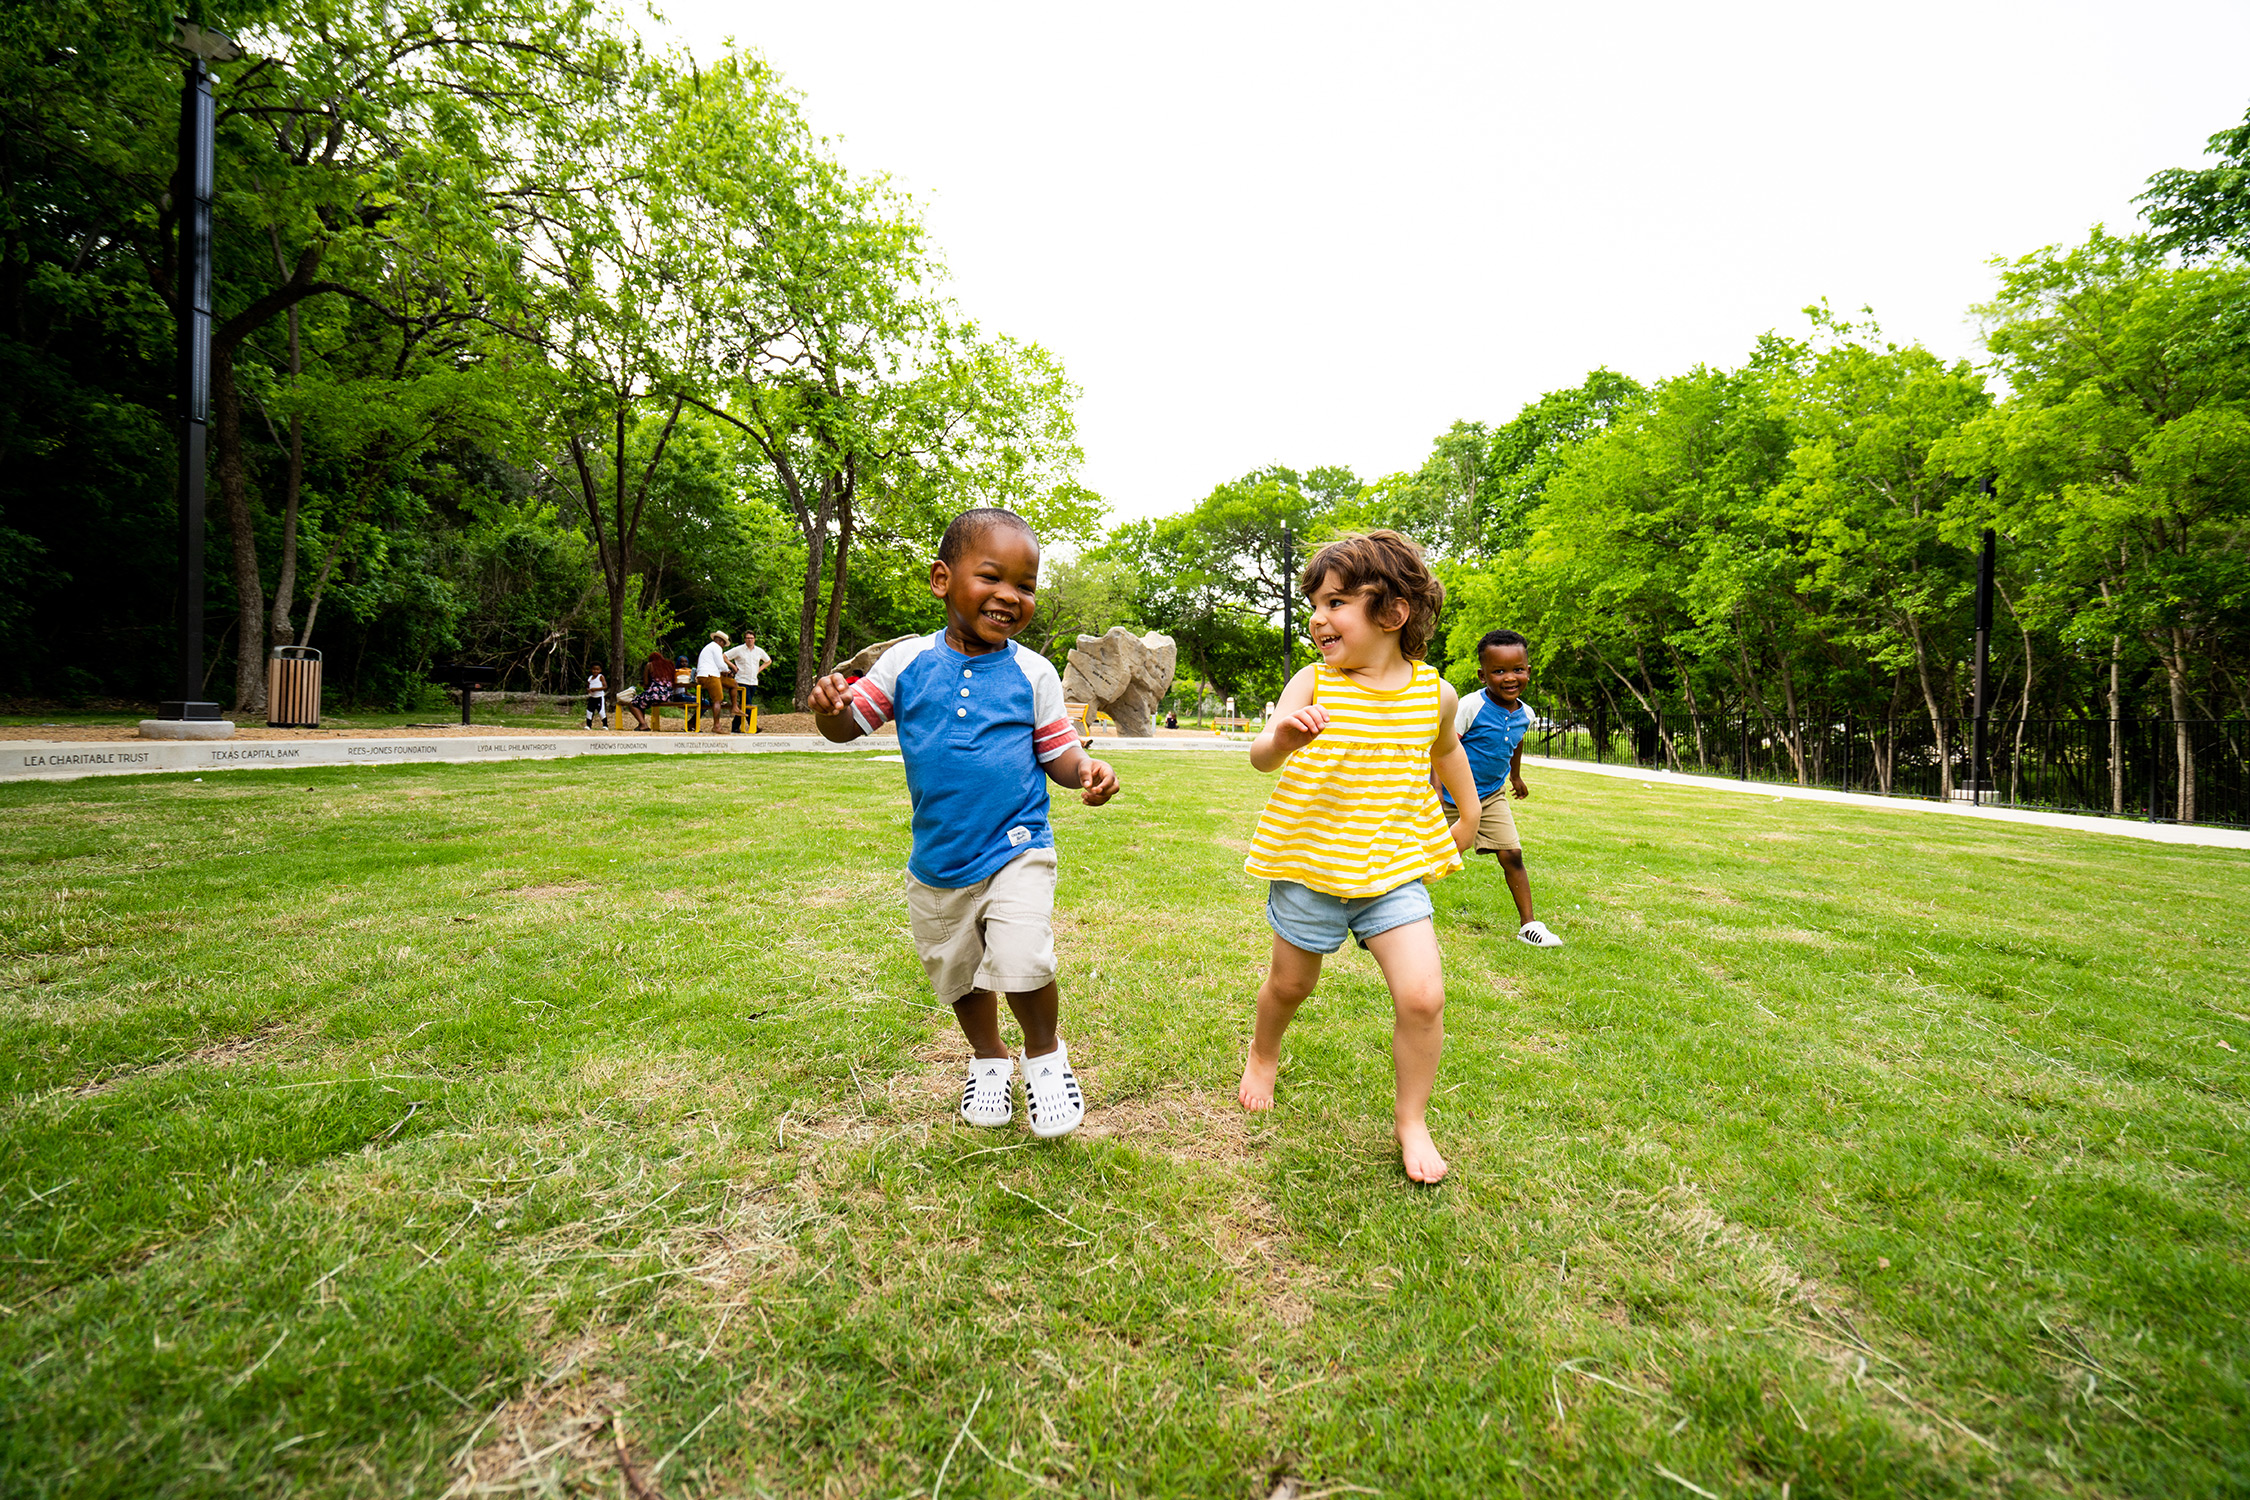 New Orleans - Outdoor Exercise Park - City Park - United States - Spot